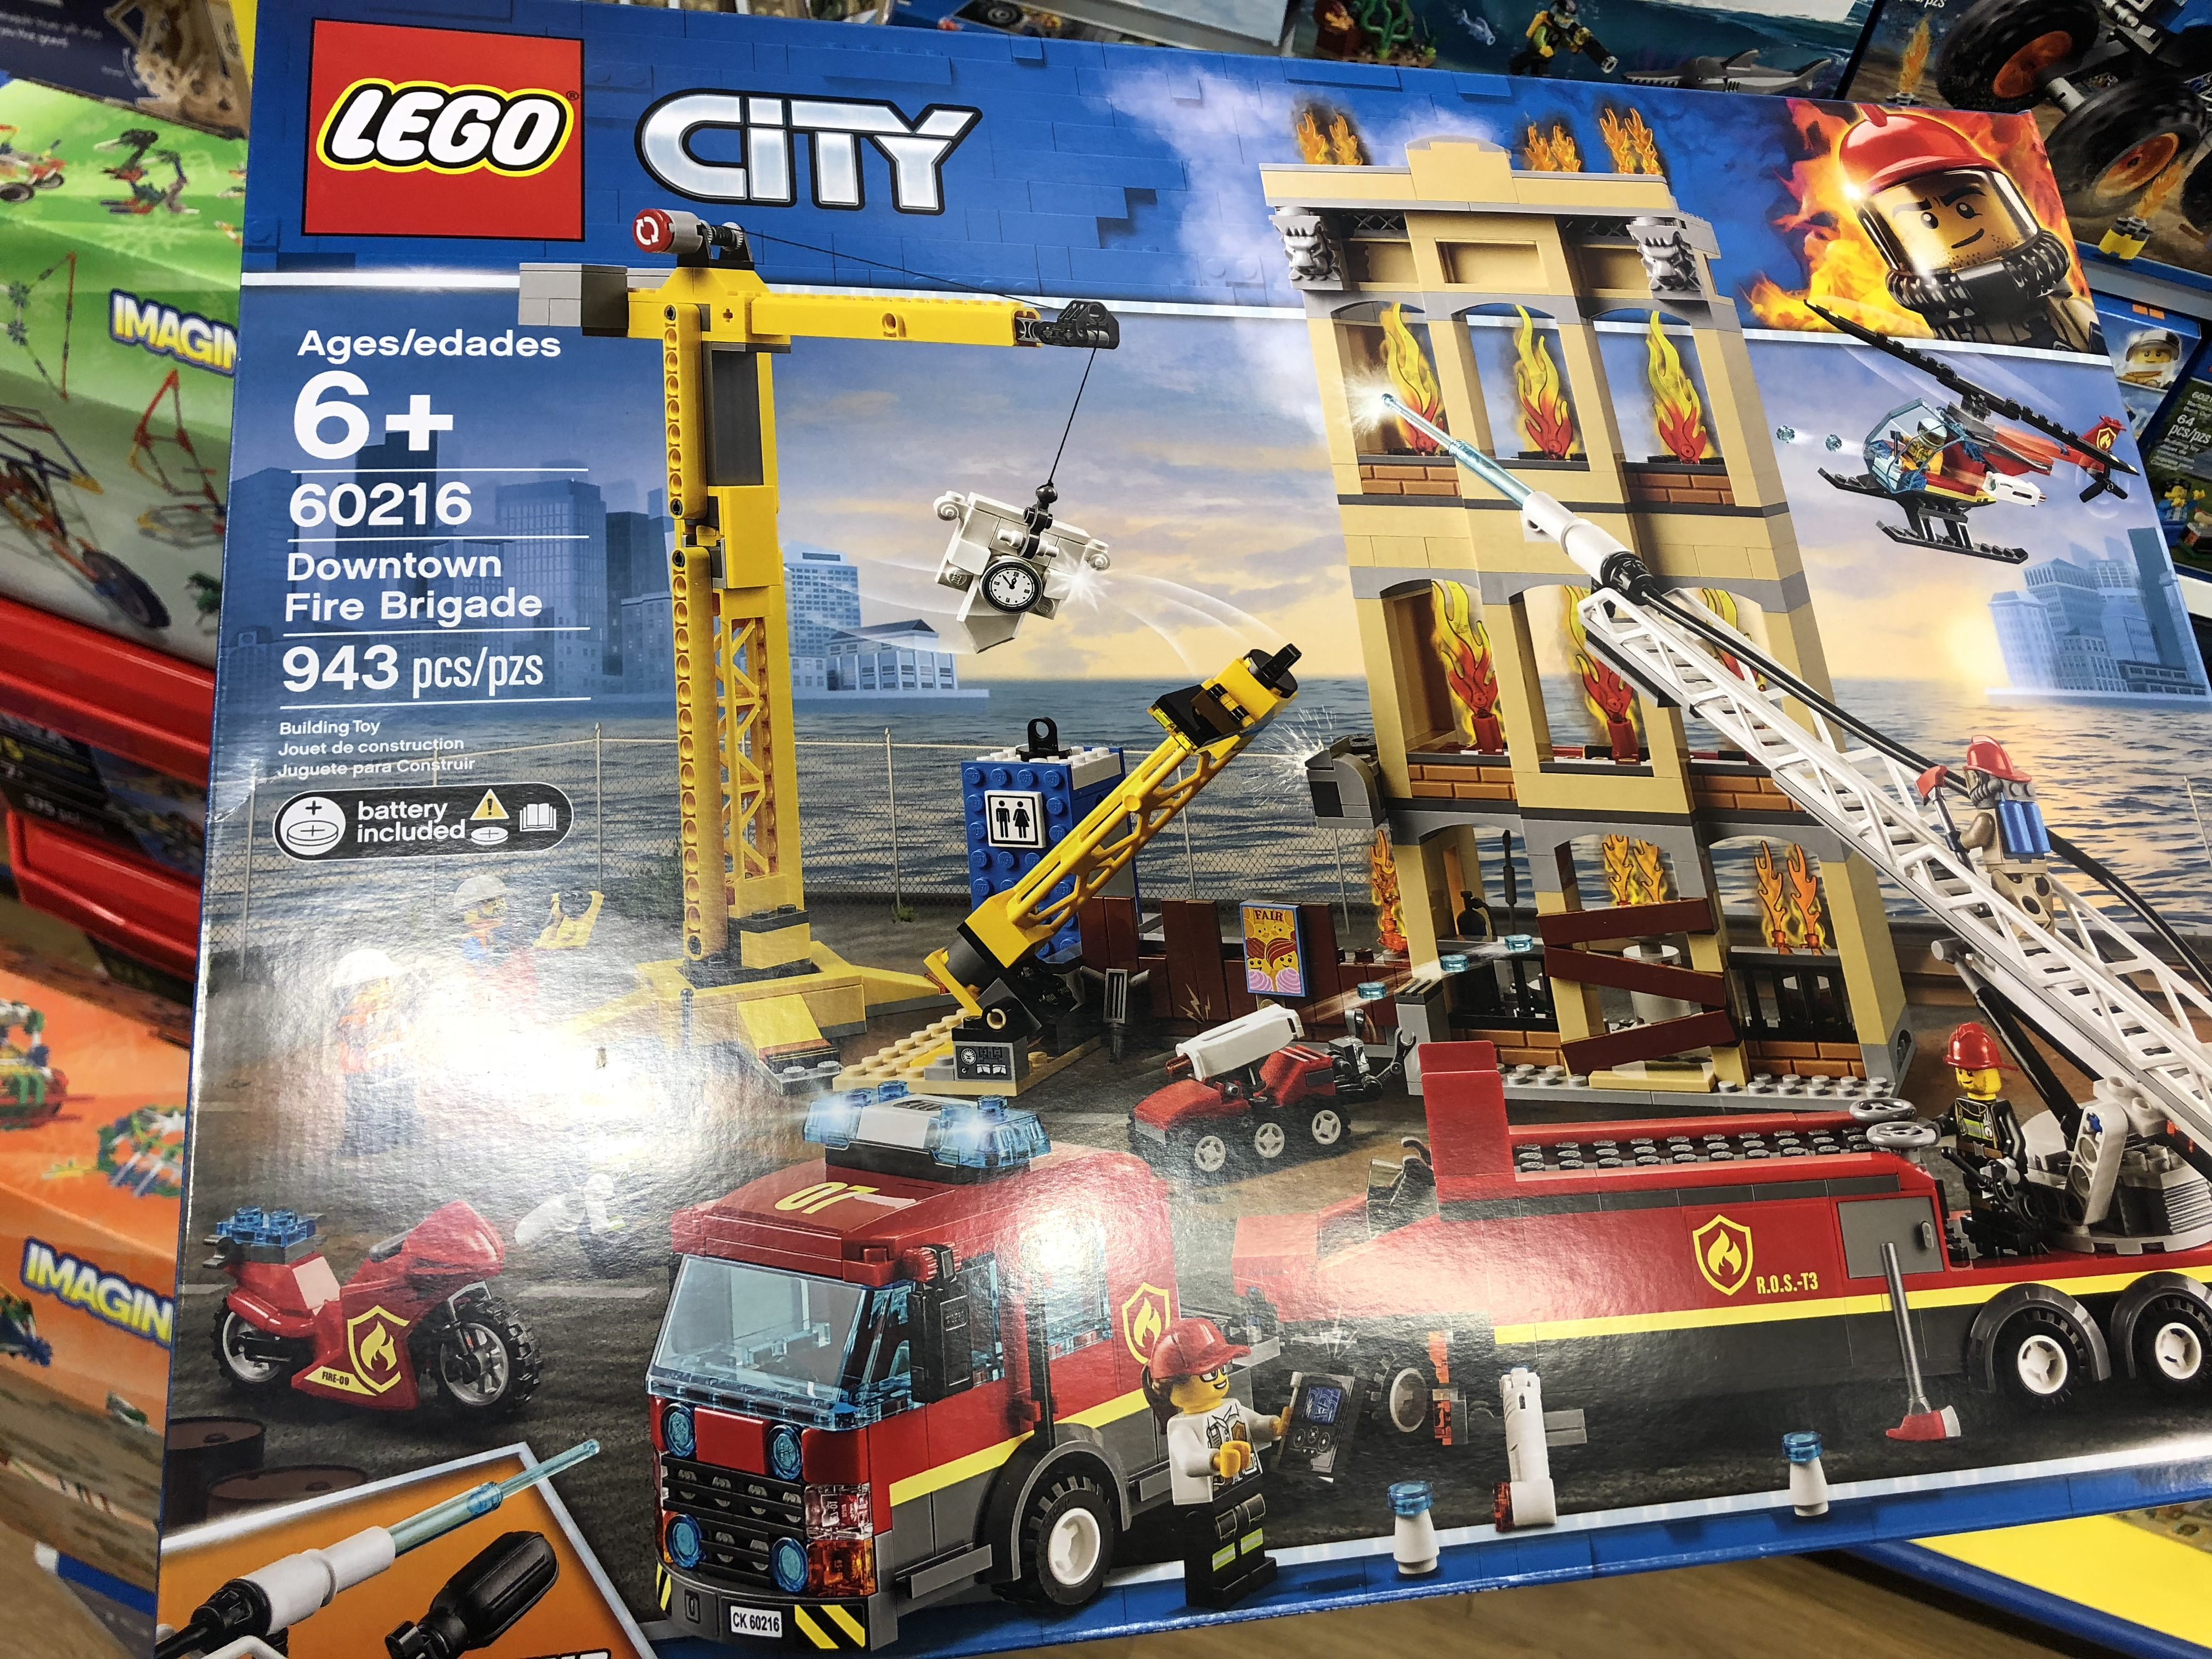 Lego City Fire Downtown Fire Brigade Promotion Off 70